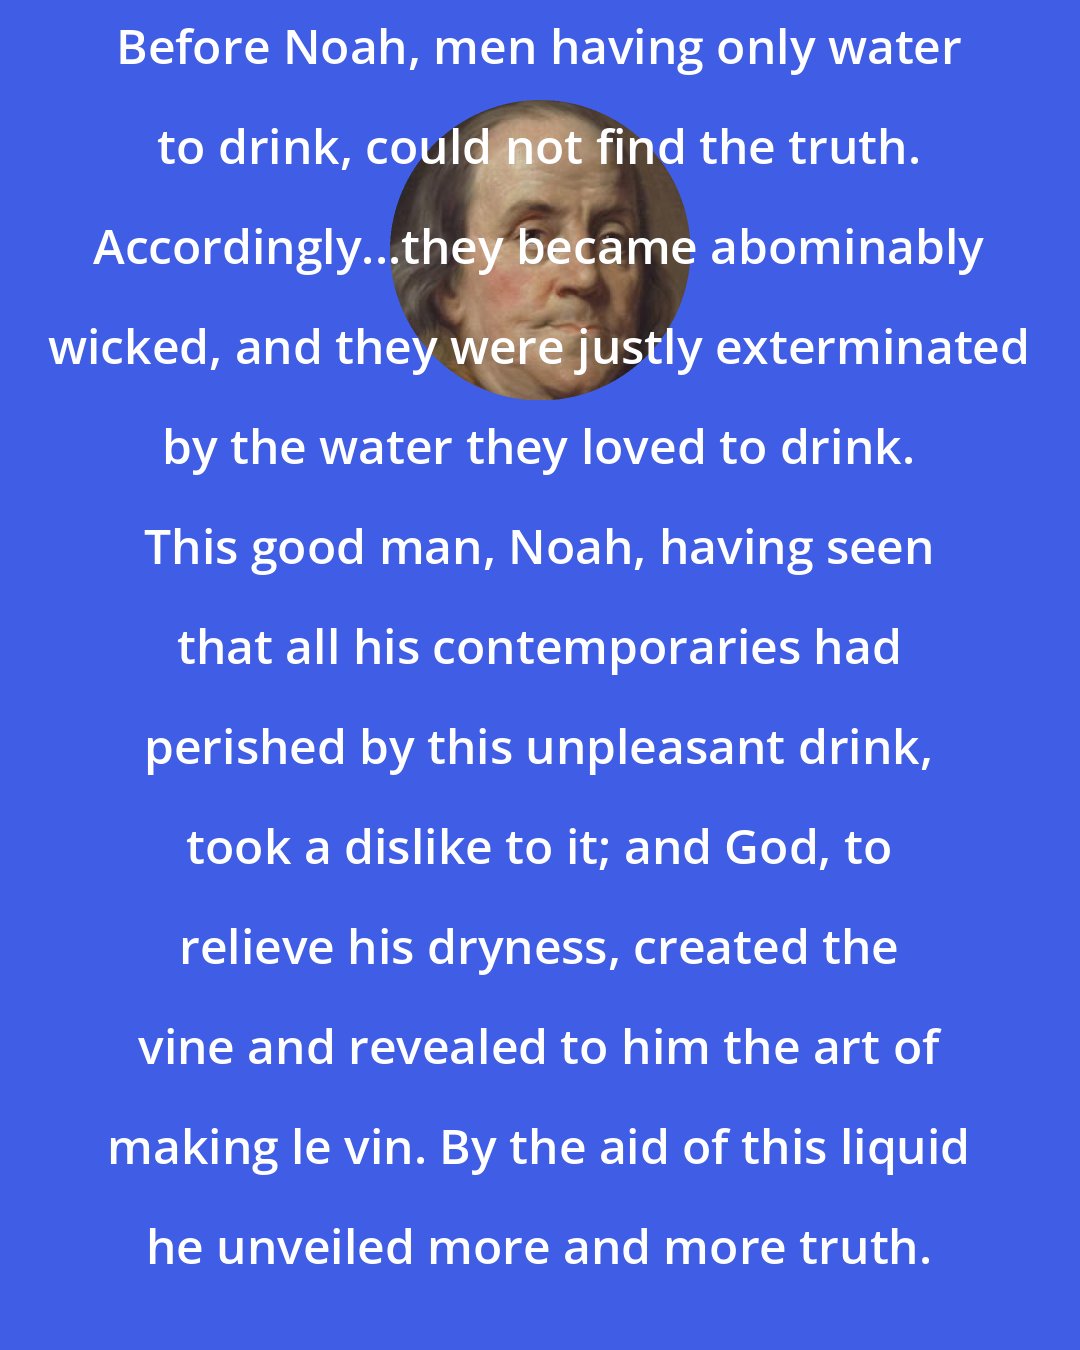 Benjamin Franklin: Before Noah, men having only water to drink, could not find the truth. Accordingly...they became abominably wicked, and they were justly exterminated by the water they loved to drink. This good man, Noah, having seen that all his contemporaries had perished by this unpleasant drink, took a dislike to it; and God, to relieve his dryness, created the vine and revealed to him the art of making le vin. By the aid of this liquid he unveiled more and more truth.